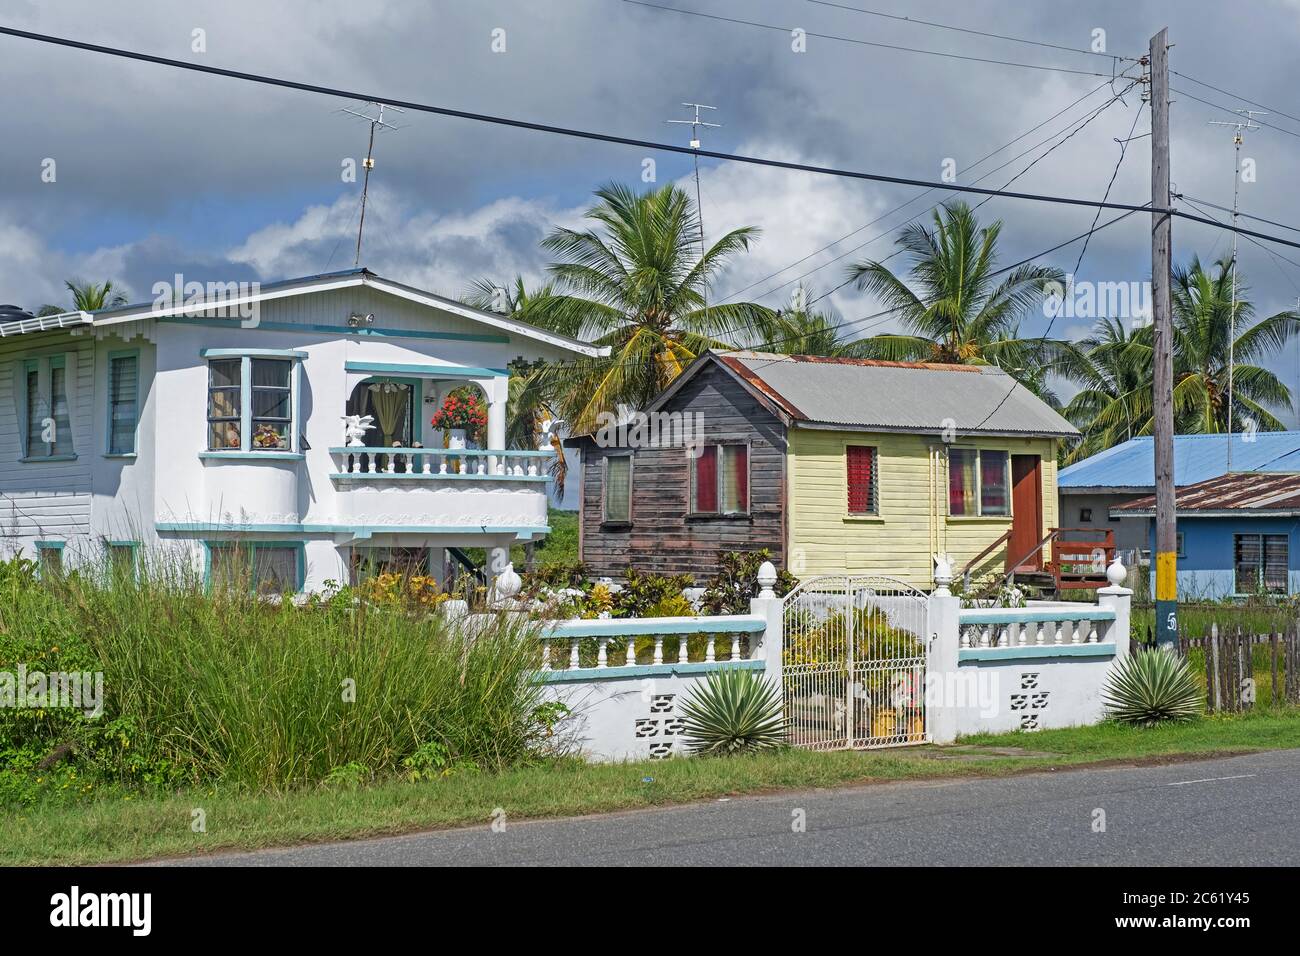 Rural village with traditional wooden houses in the countryside of Guyana, South America Stock Photo